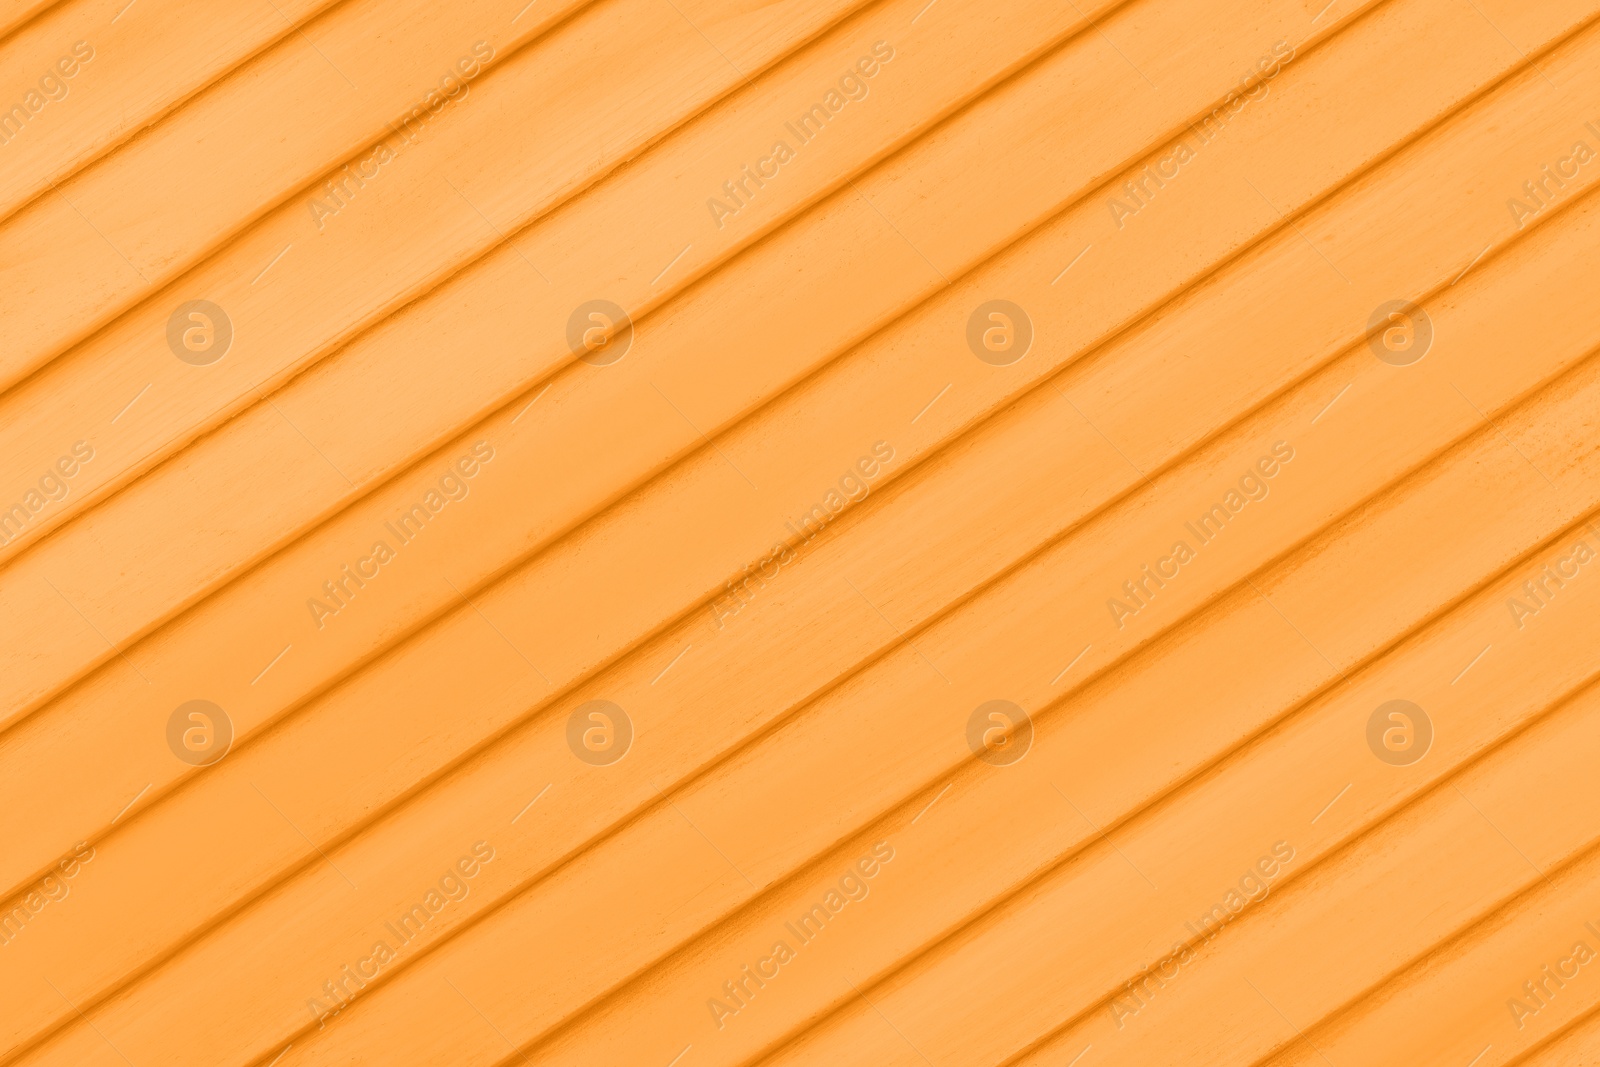 Image of Texture of orange wooden surface as background, top view